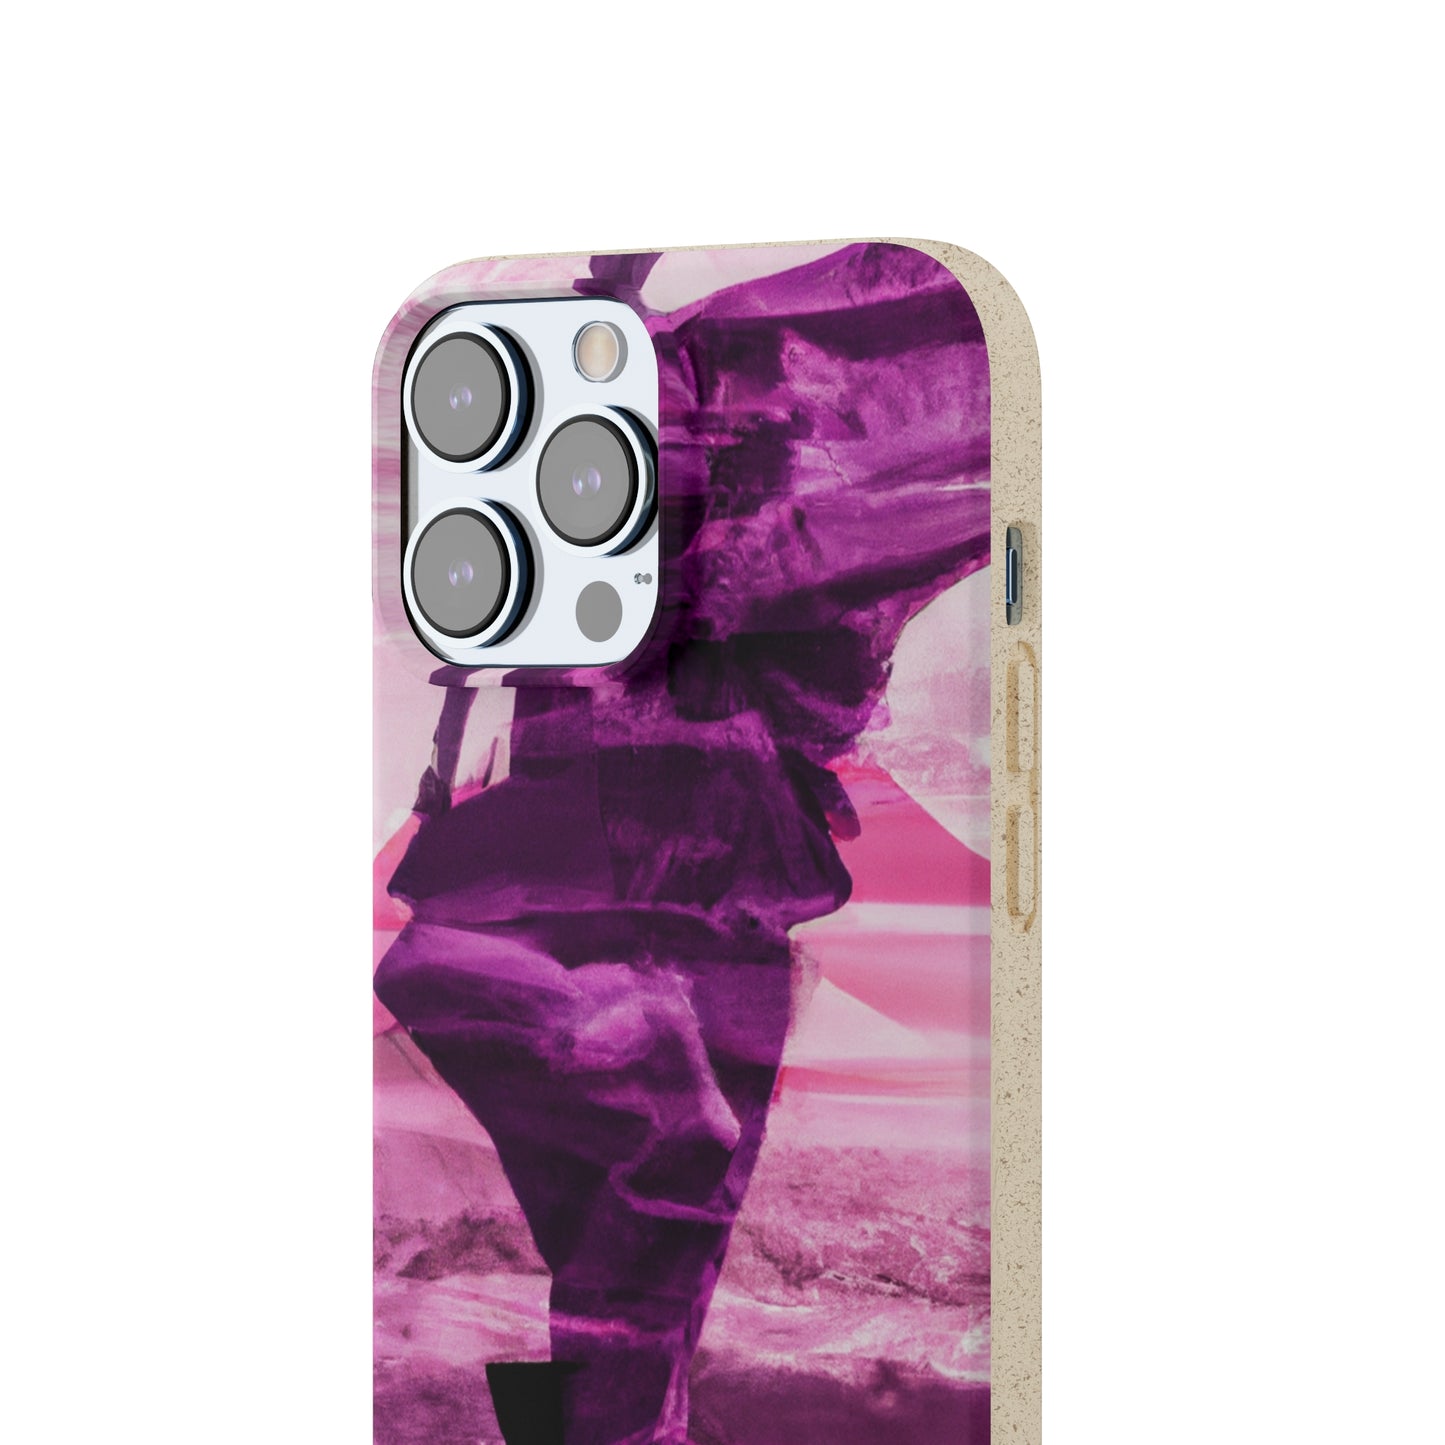 "The Timeless Mosaic" - Bam Boo! Lifestyle Eco-friendly Cases